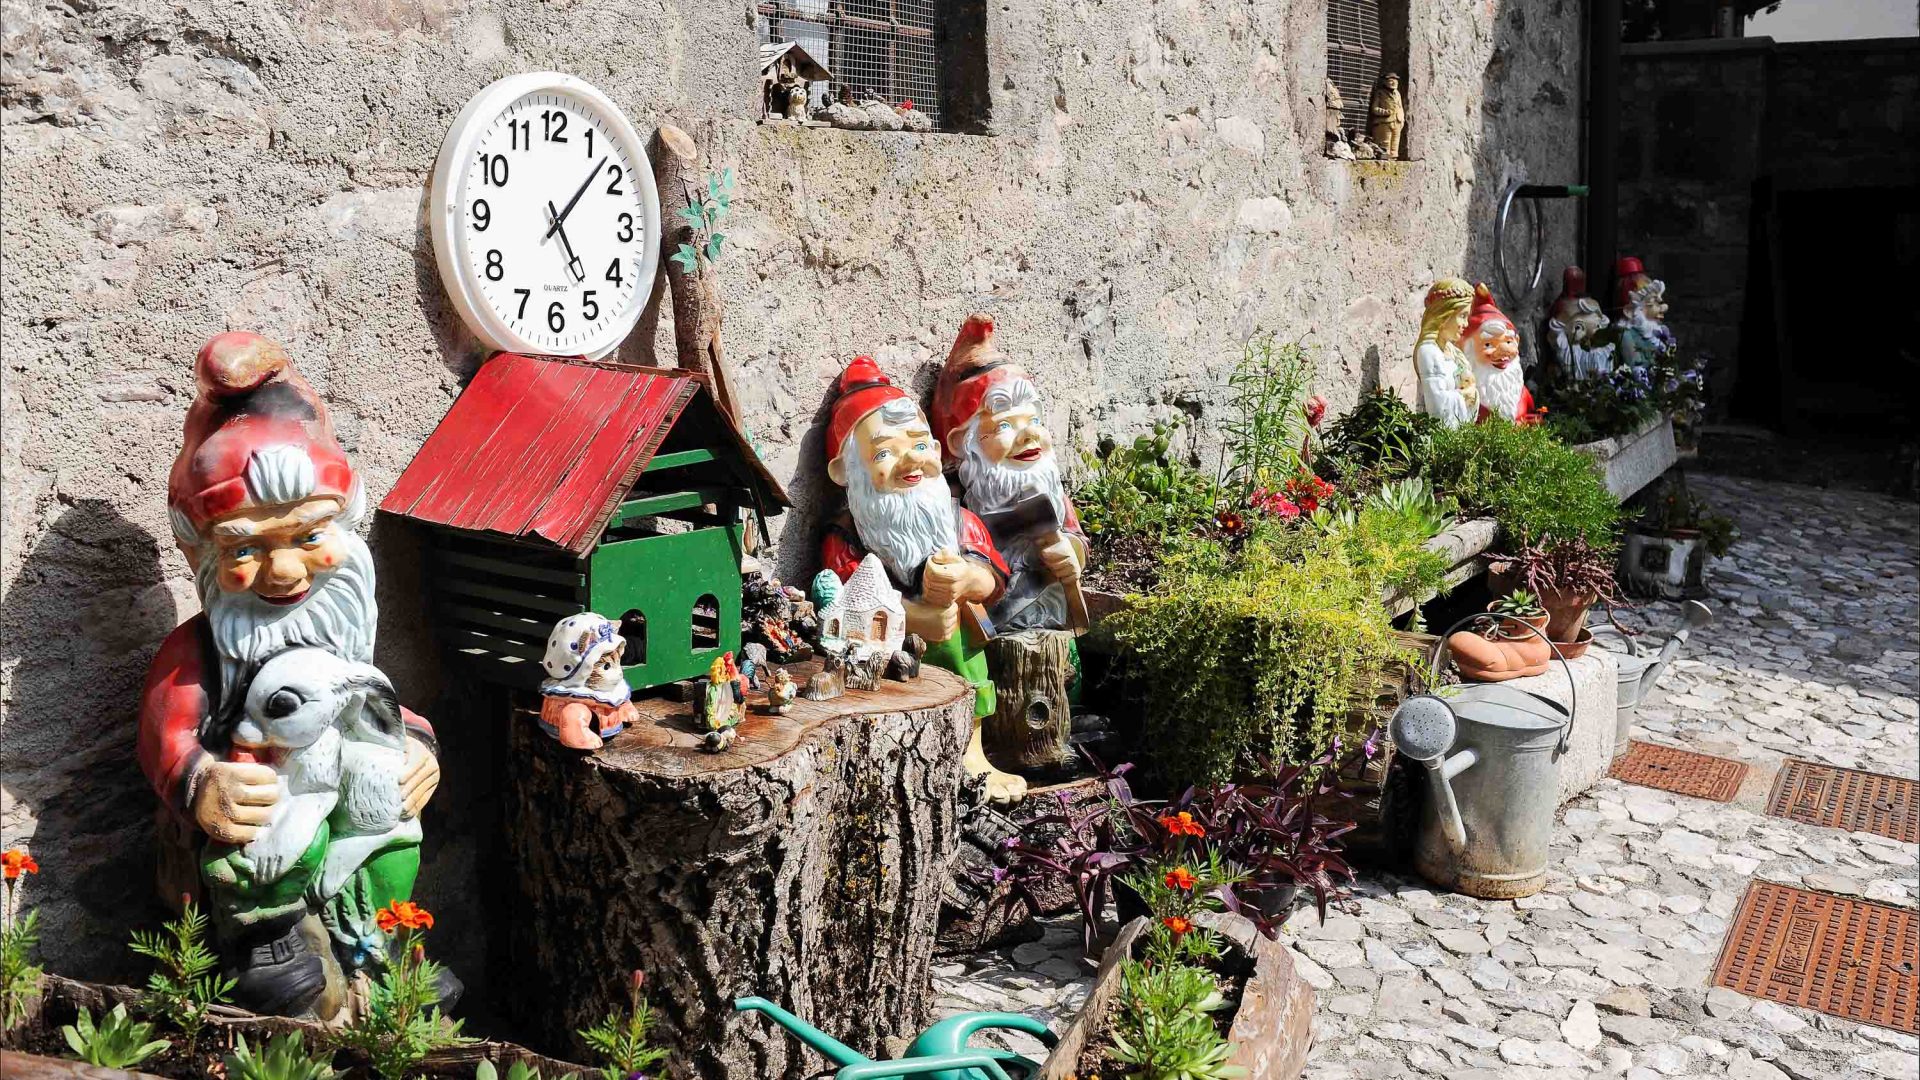 In the town of Pesariis someone has created a garden along their wall filled with gnomes and with a clock sitting on top.